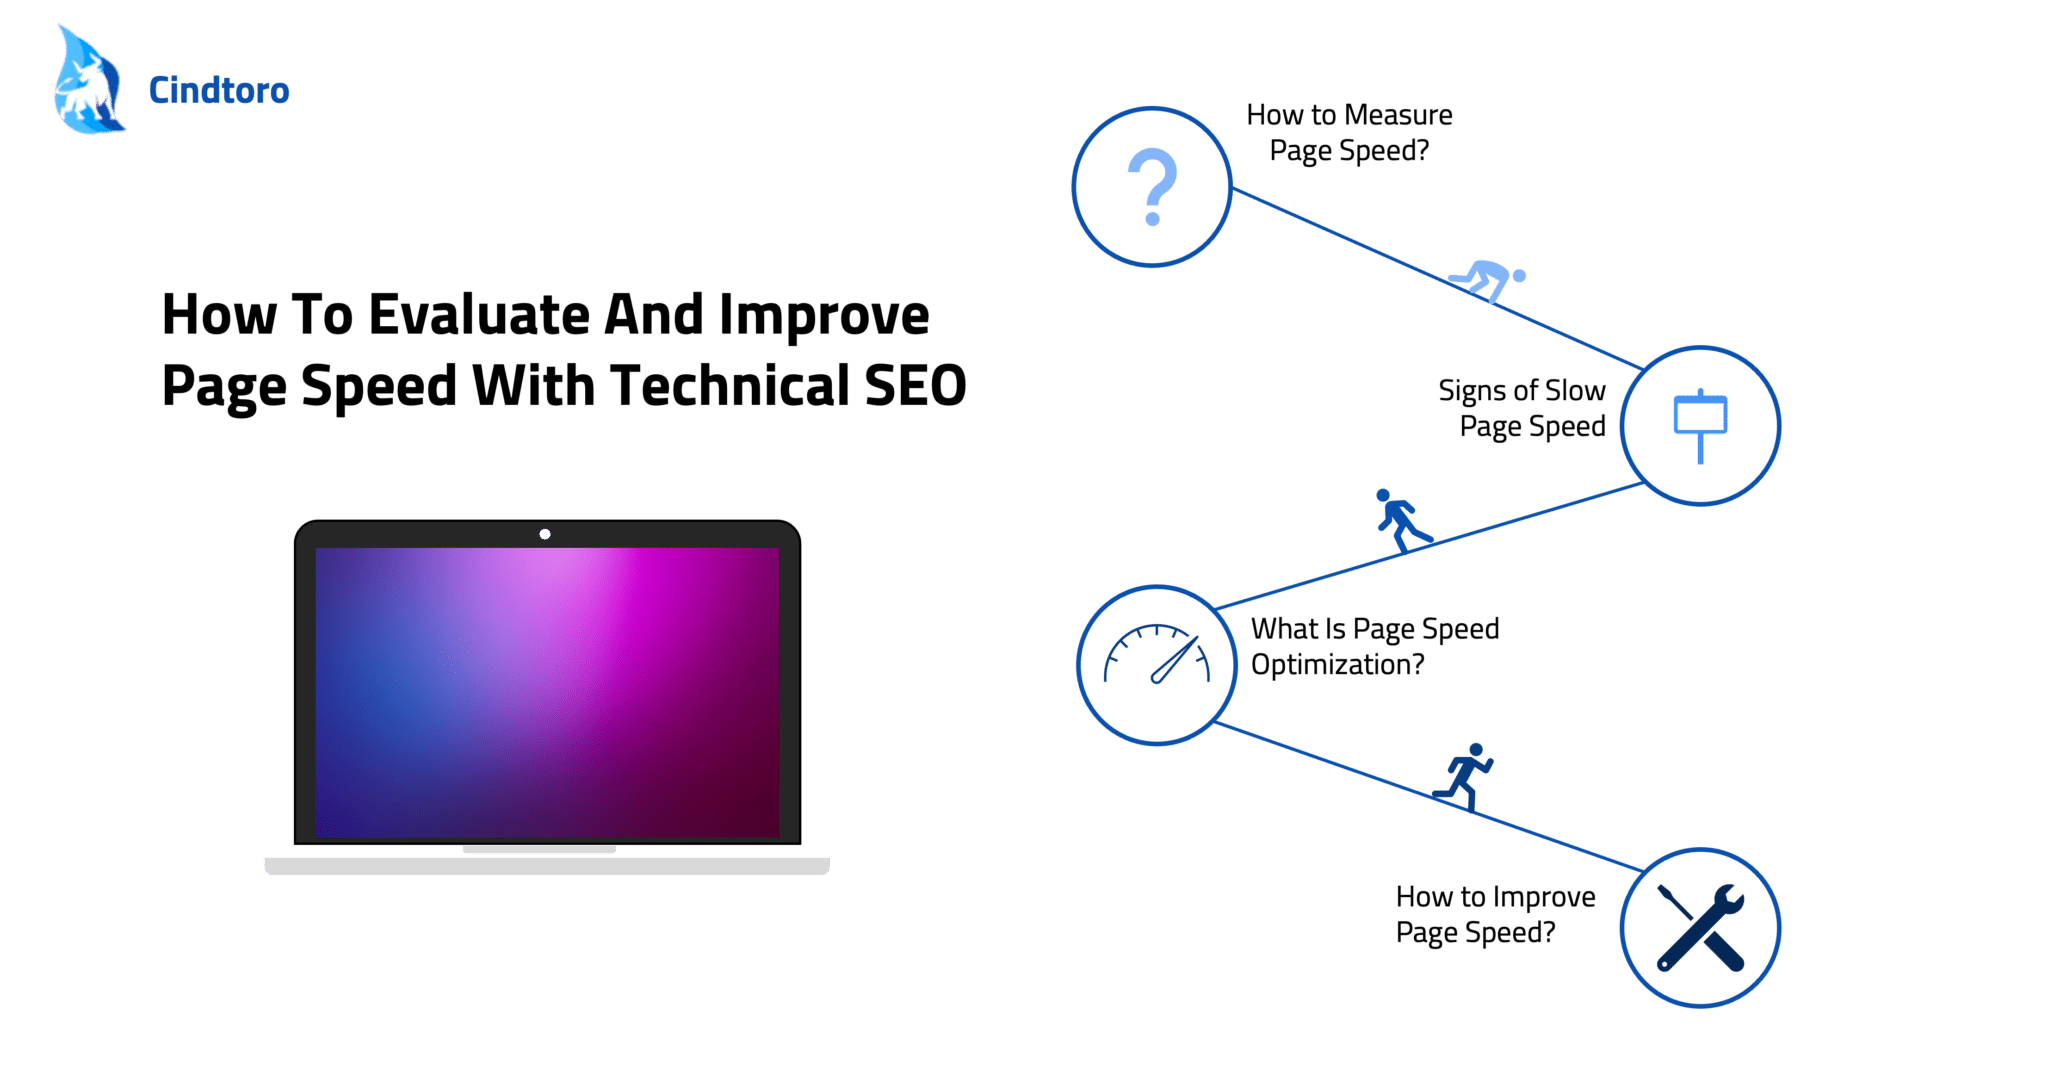 How To Evaluate And Improve Page Speed With Technical SEO